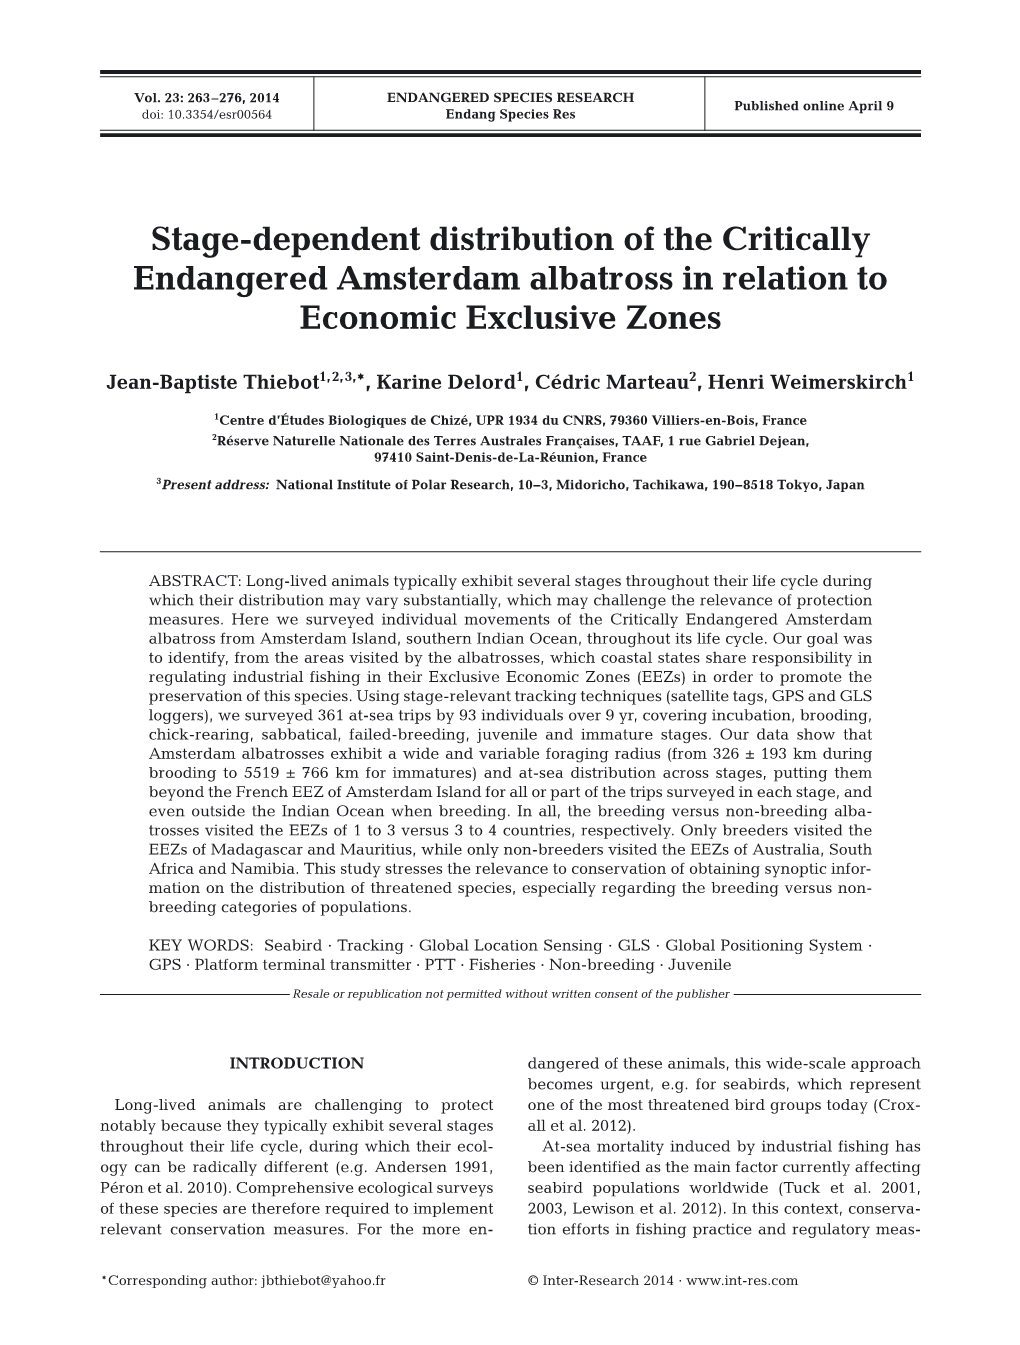 Stage-Dependent Distribution of the Critically Endangered Amsterdam Albatross in Relation to Economic Exclusive Zones